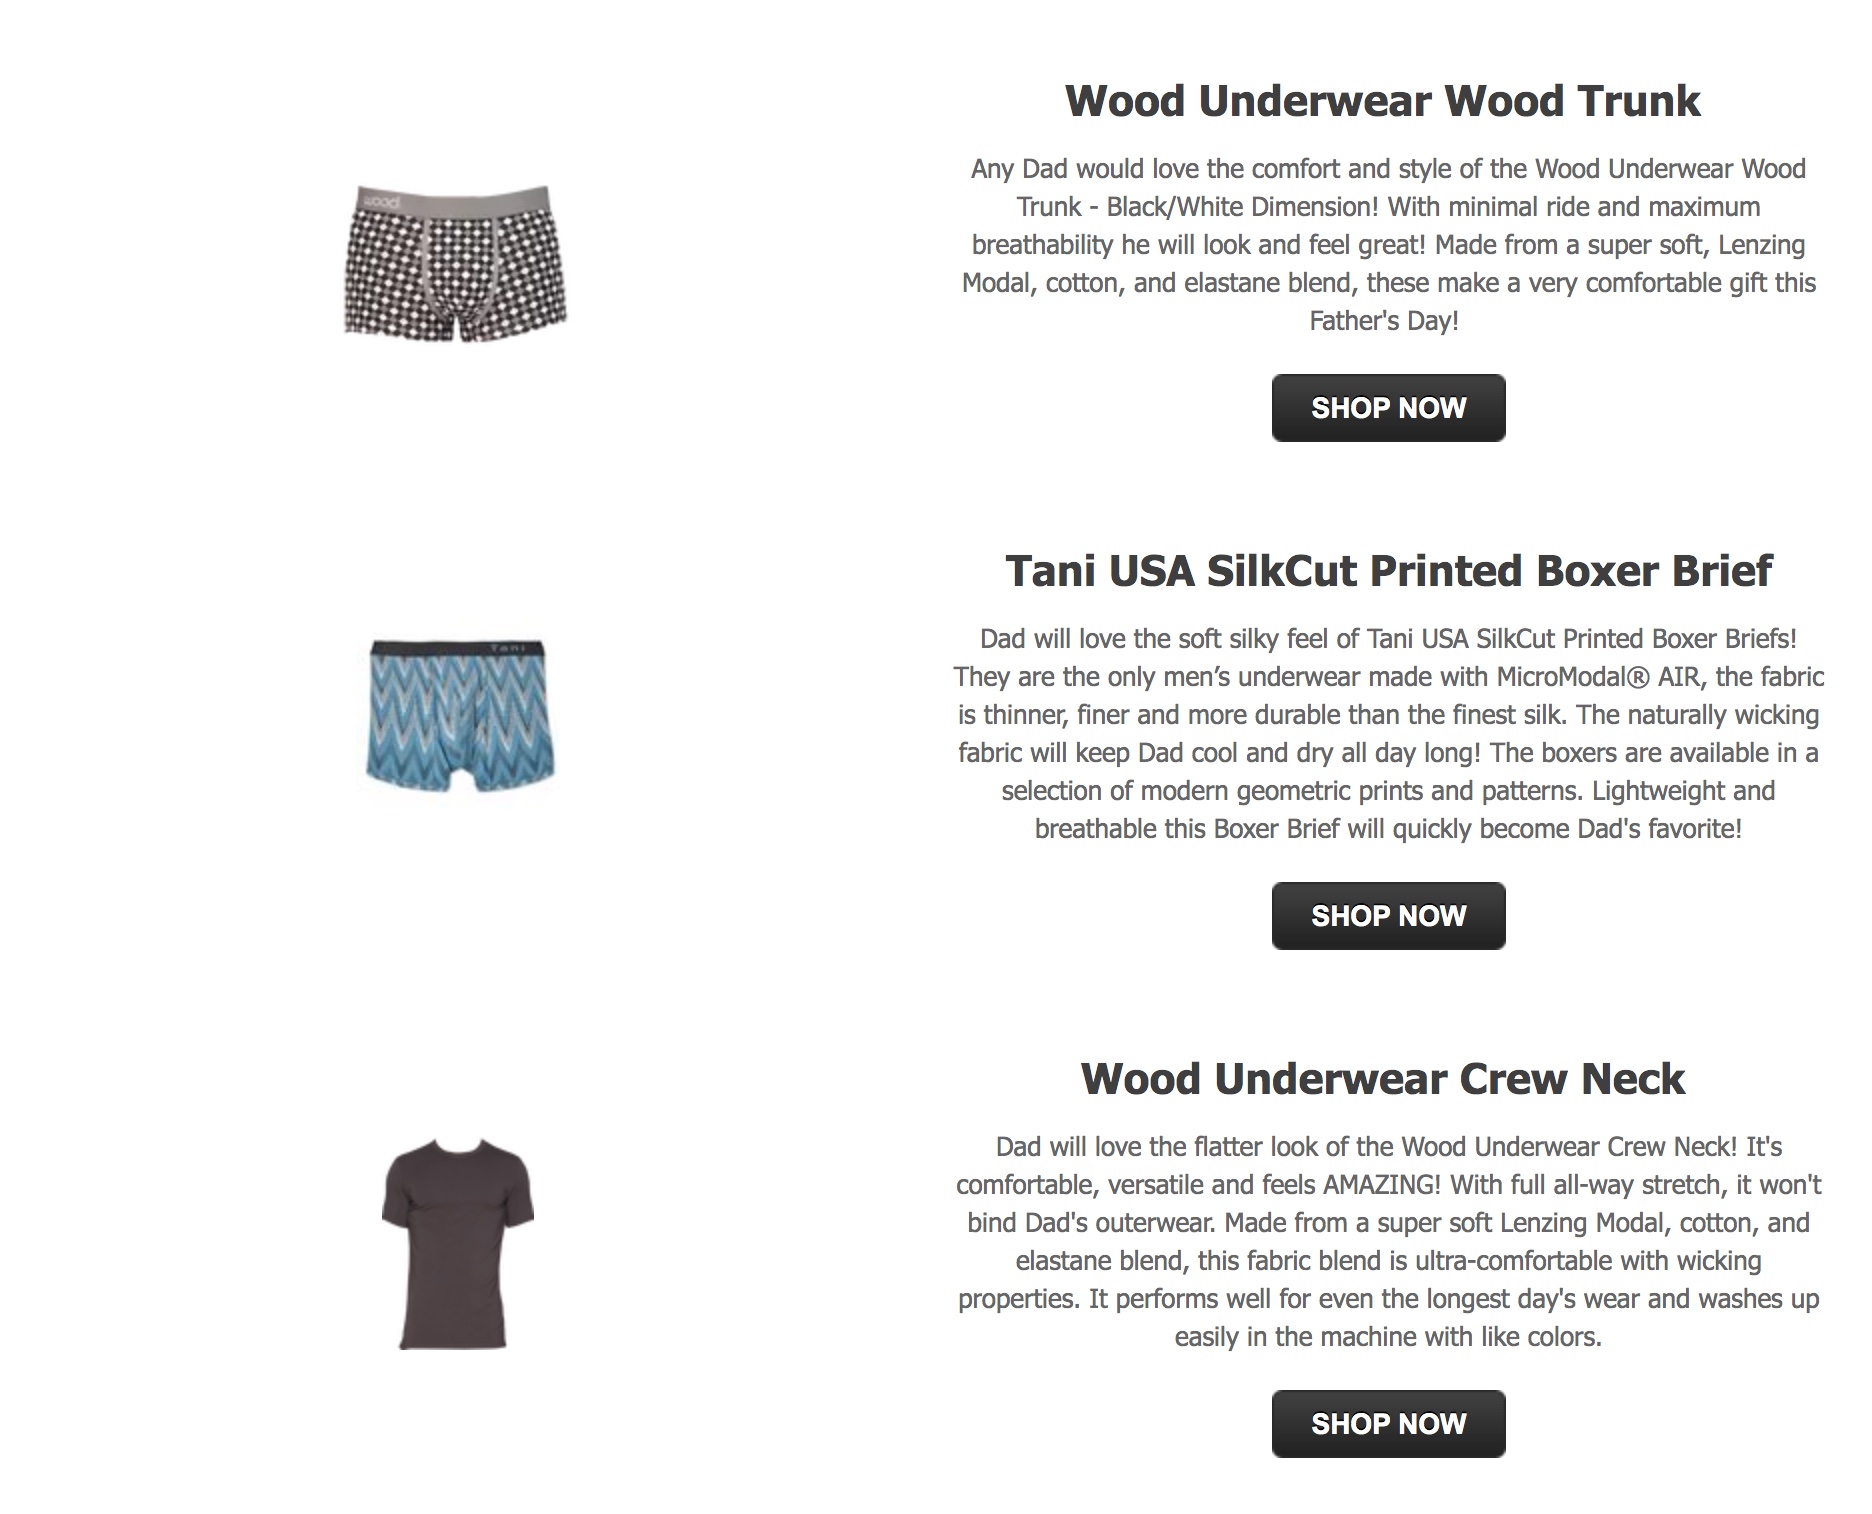 Fathers Day Gift Guide - Urban Milan - Wood Underwear